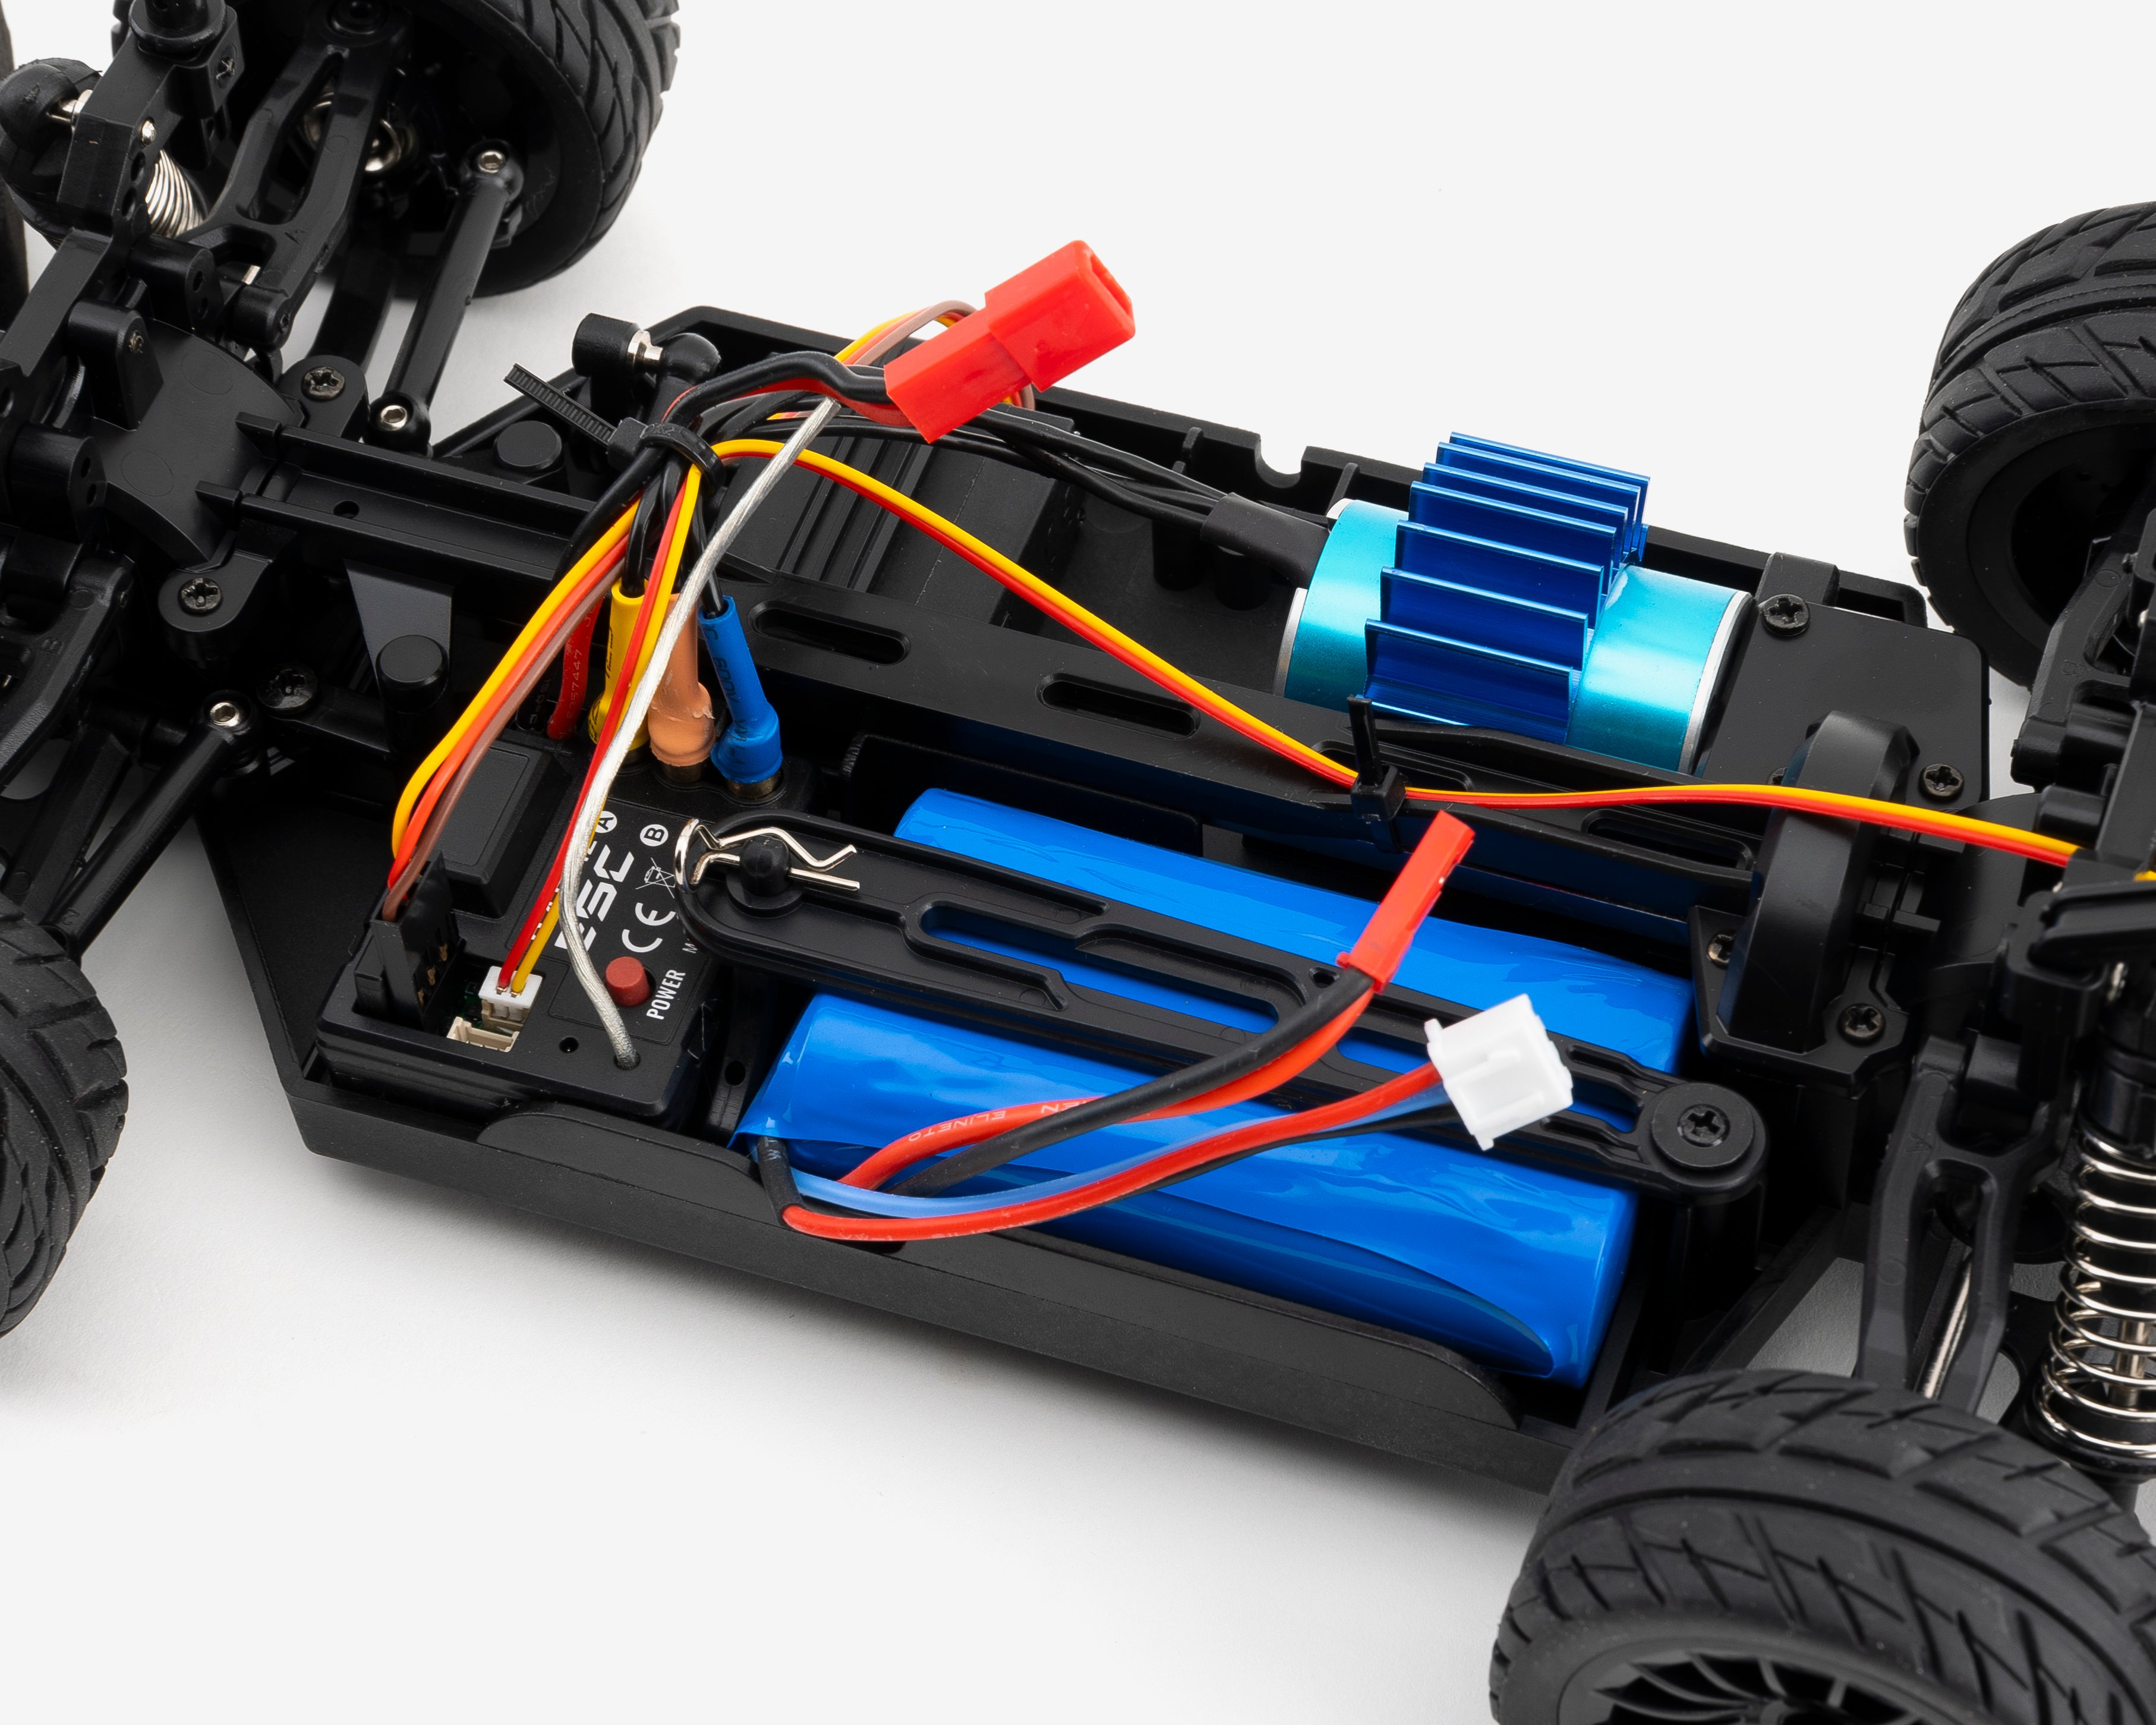 Breaker Pro Chassis Photo